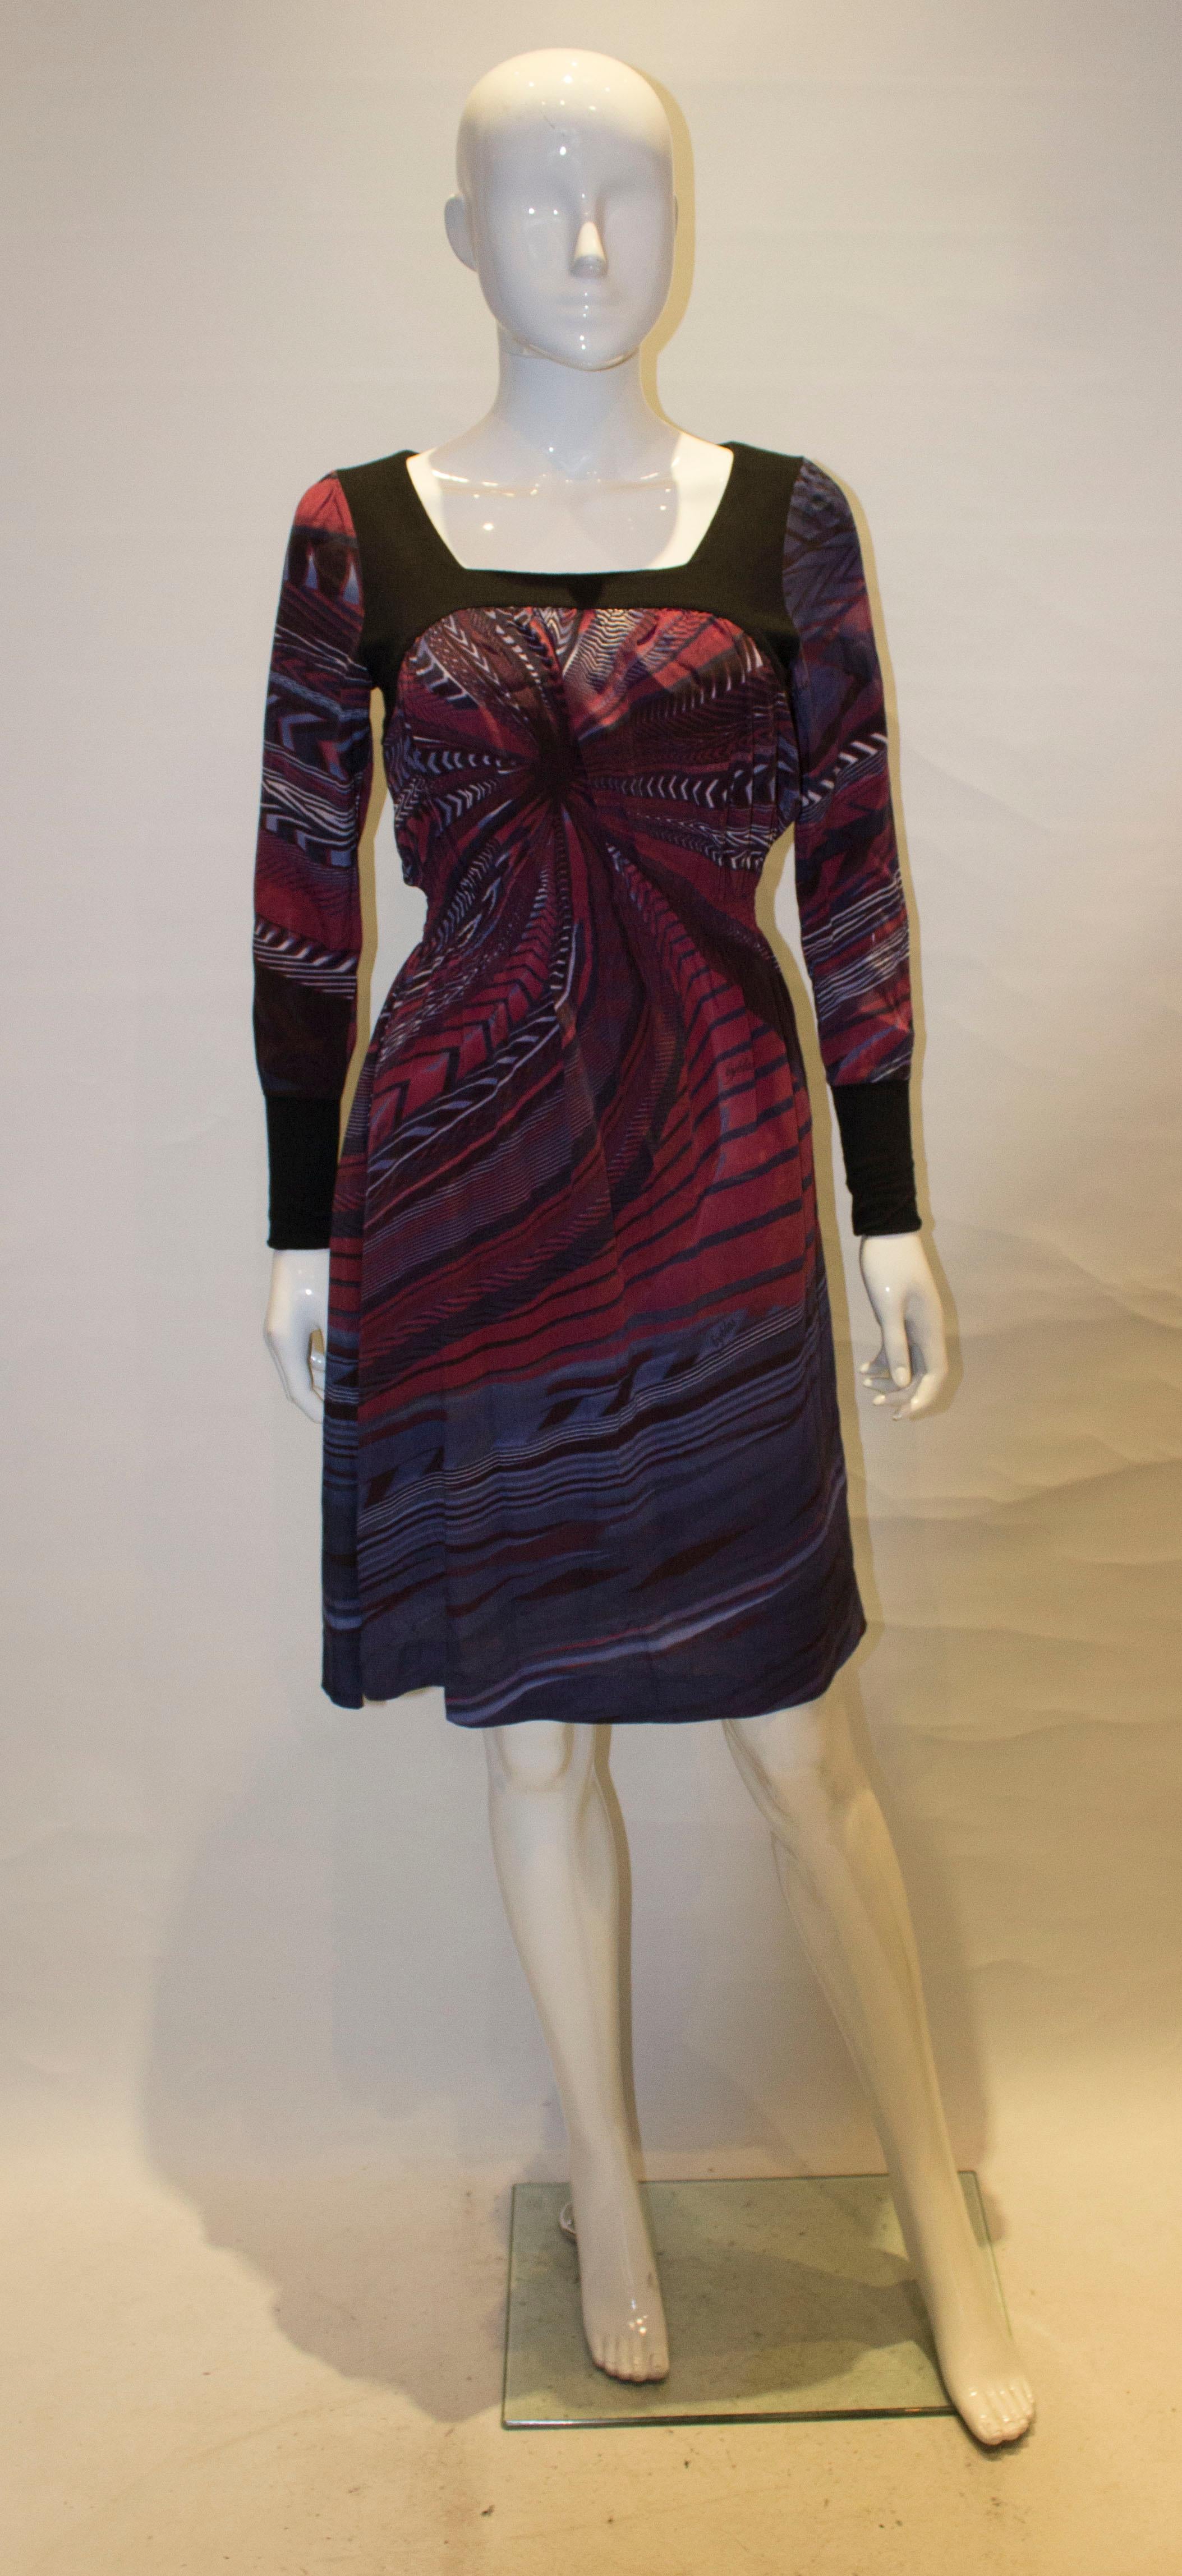 A chic and easy to wear dress by Byblos. The body of the dress is in  a multicolour pink, black and purple print . The dress has elasticated waist with black cuffs and neckline. It is fully lined.